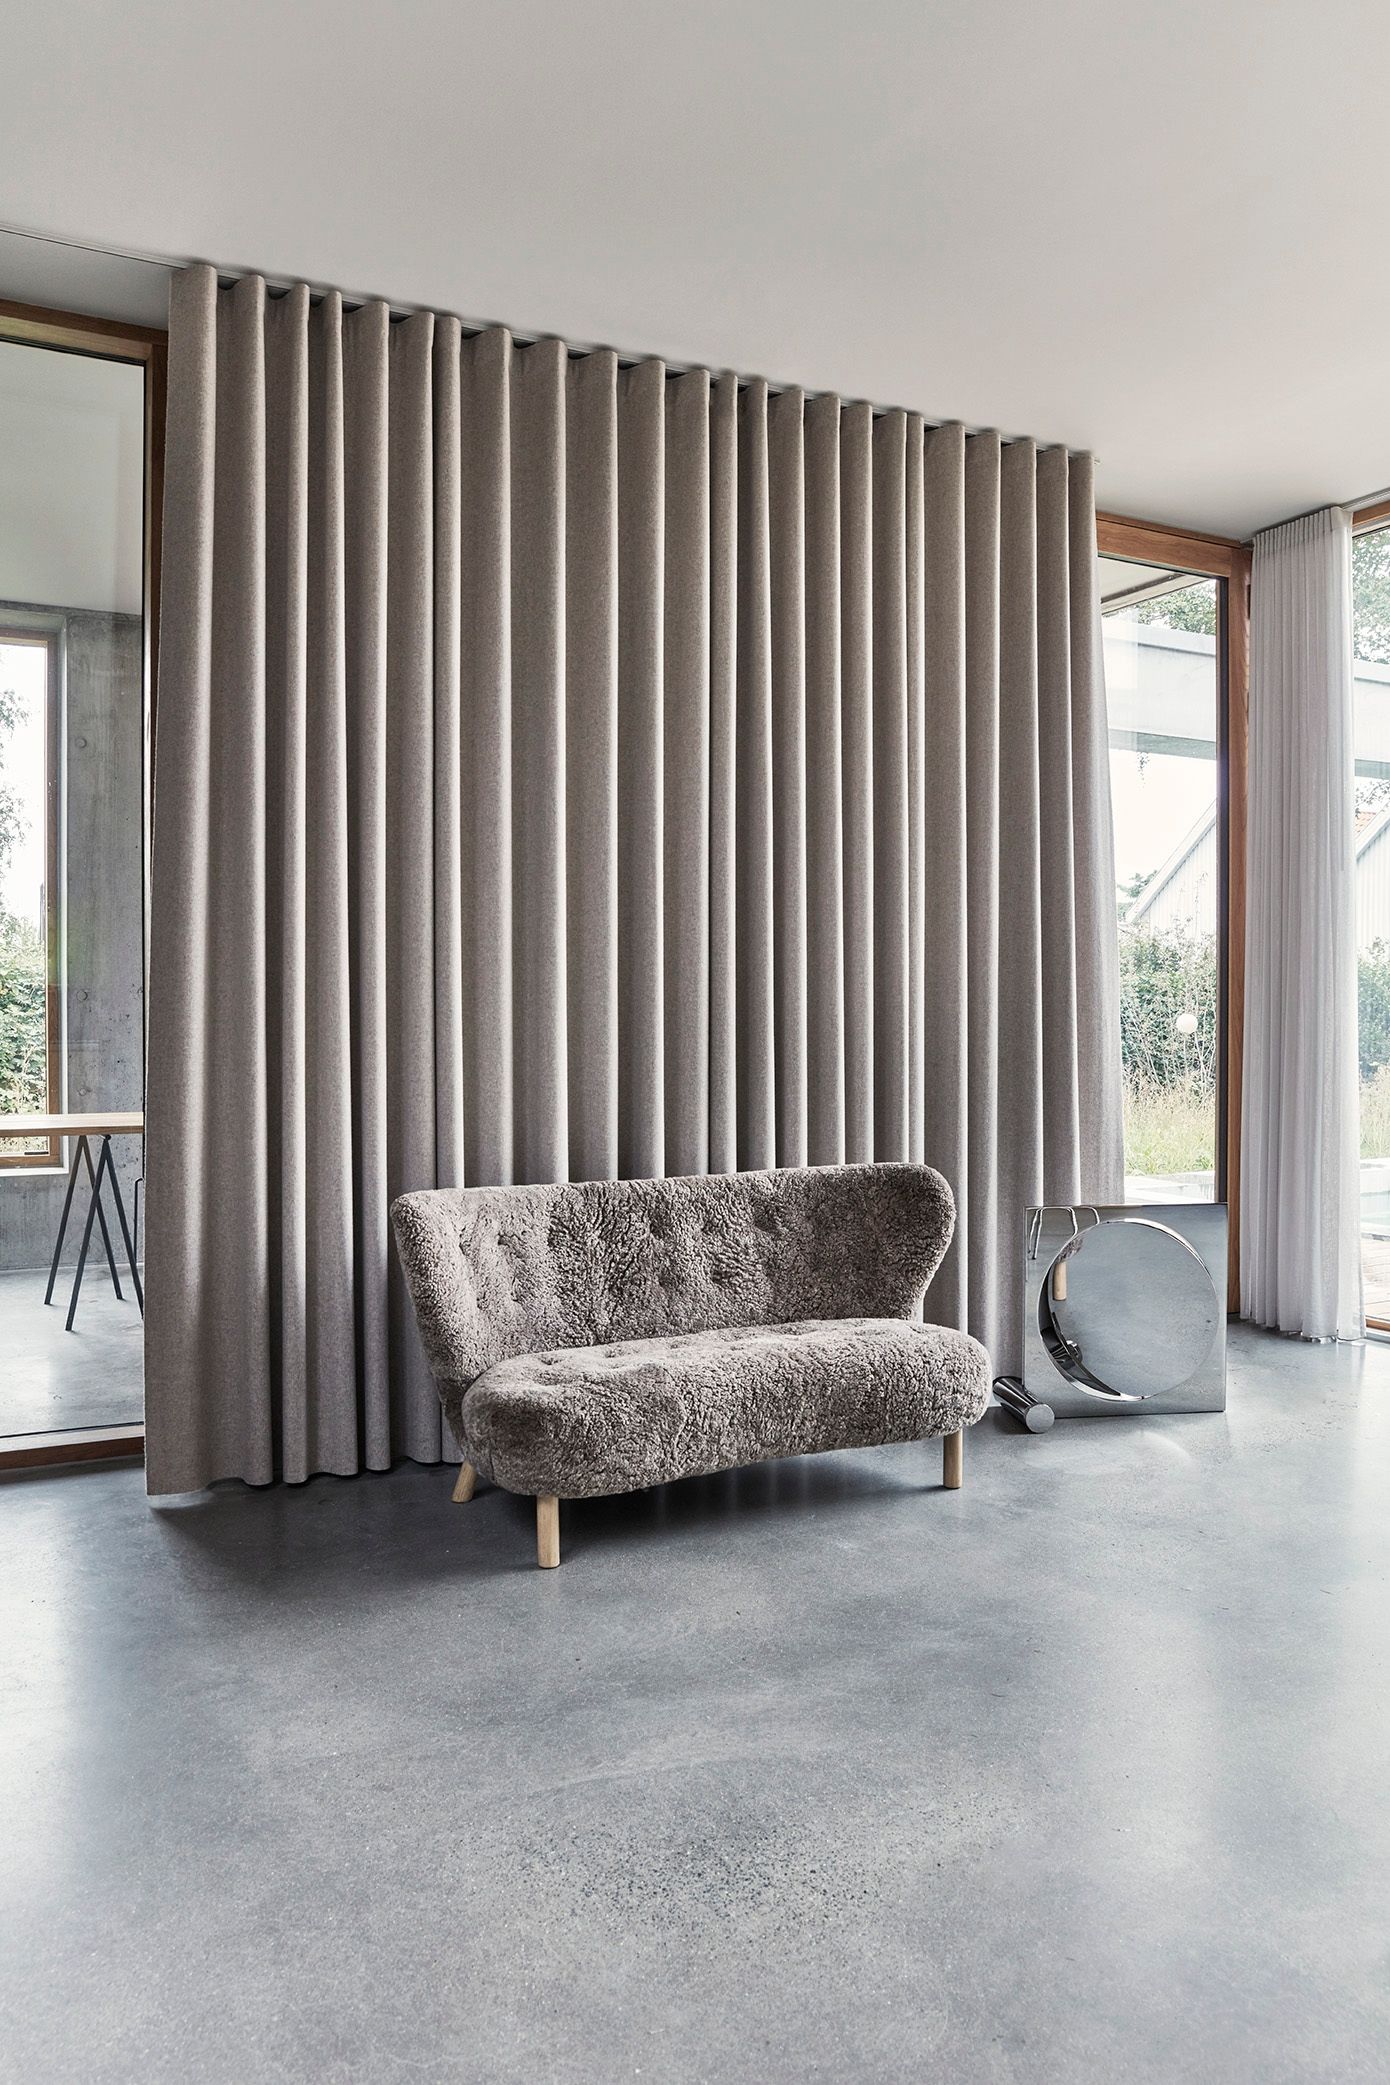 Long Curtains: Add Drama and Elegance to Your Windows